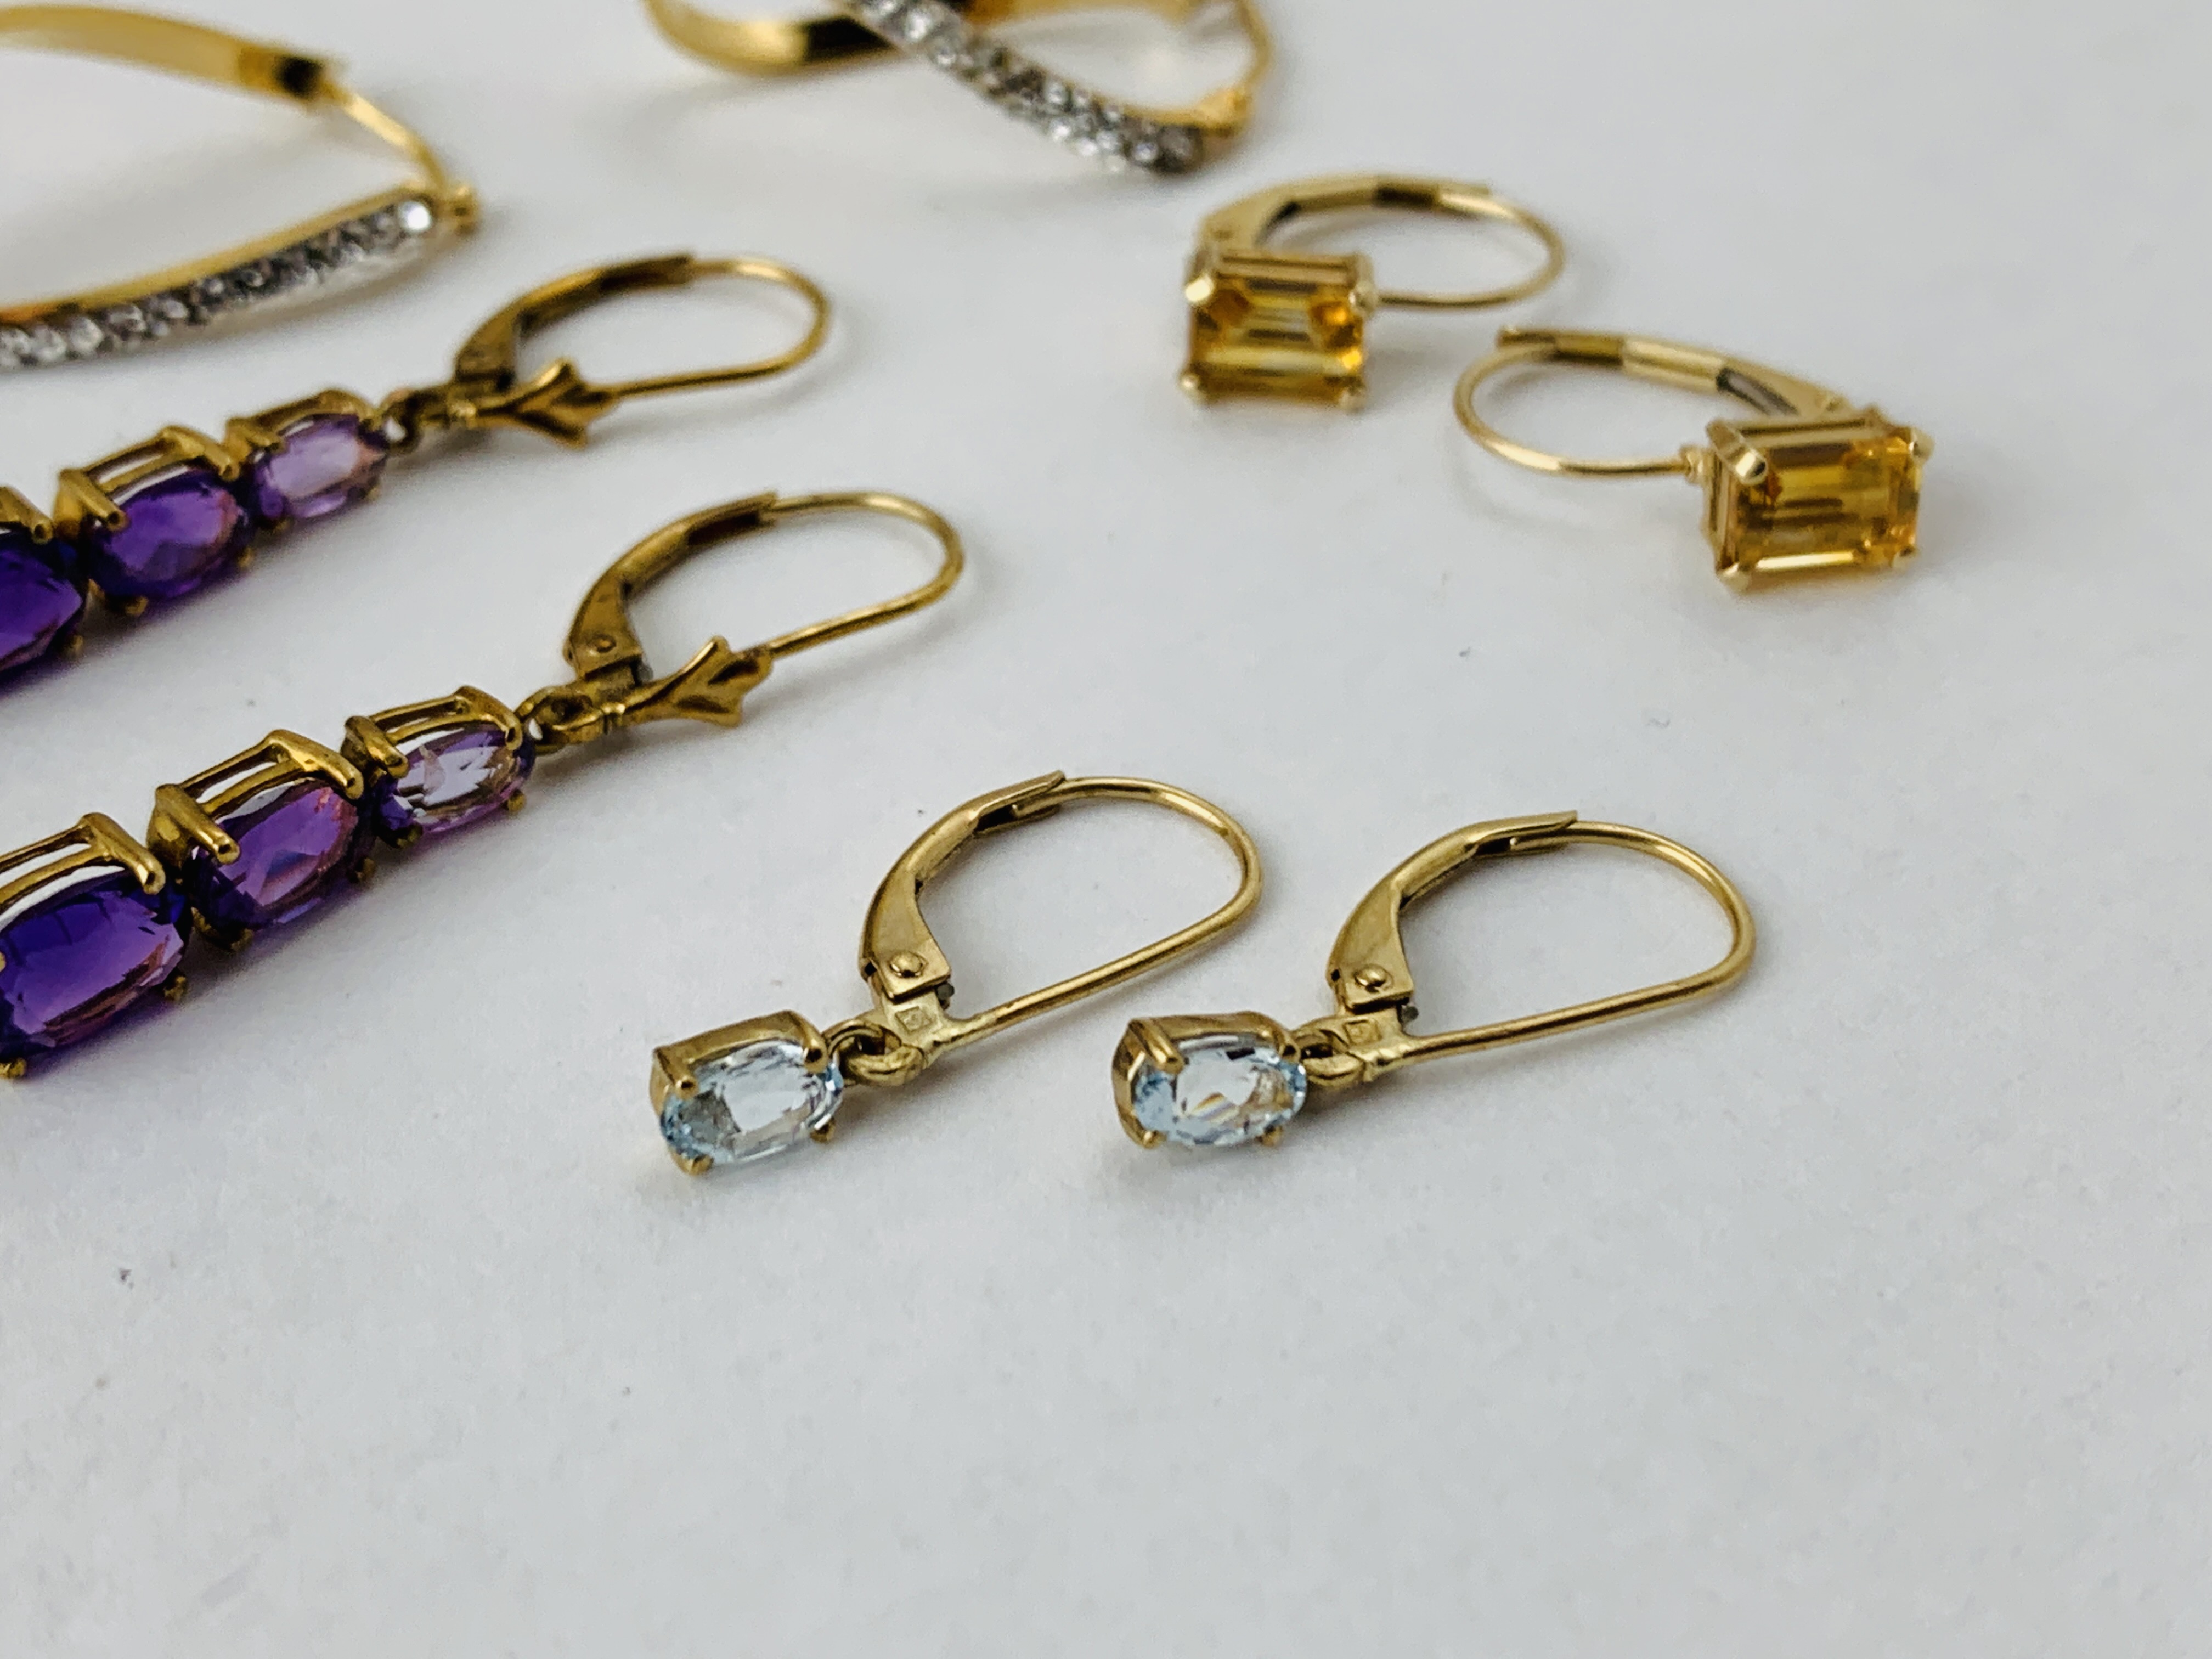 4 X PAIRS OF 9CT GOLD STONE SET DESIGNER EARRINGS - Image 2 of 7